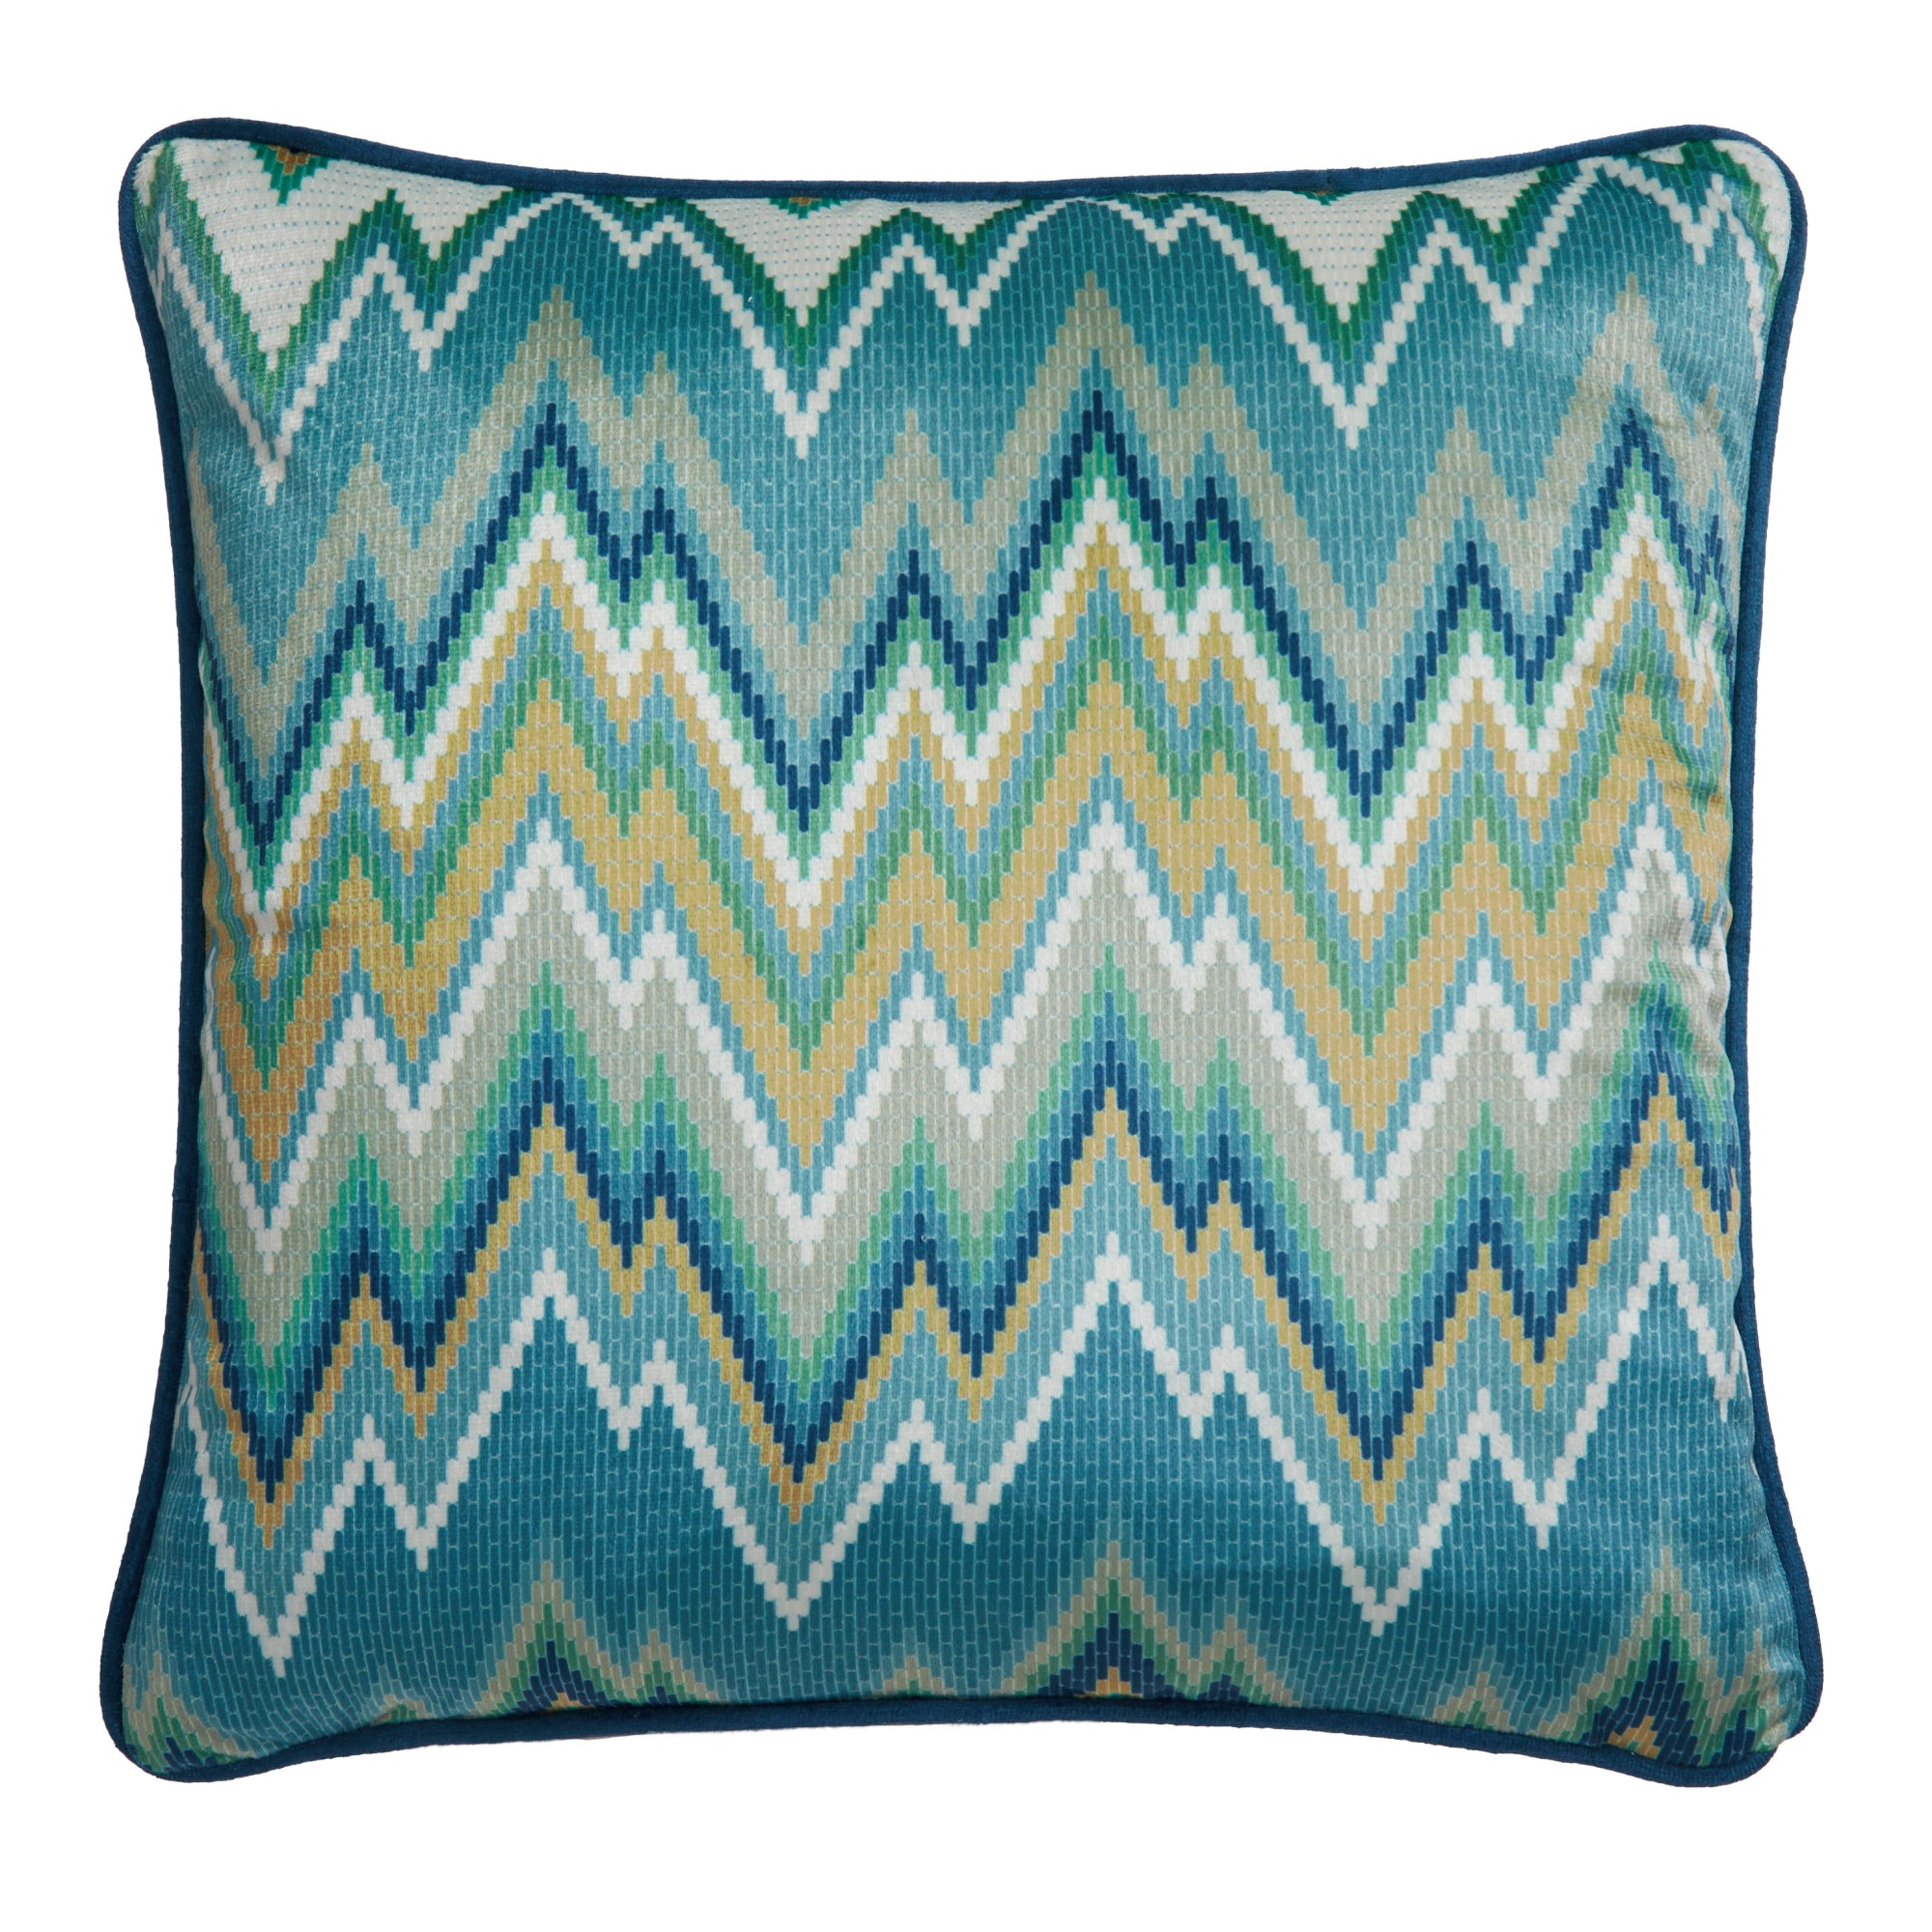 Filled Cushion Pants on Fire by Laurence Llewelyn-Bowen in Teal/Green